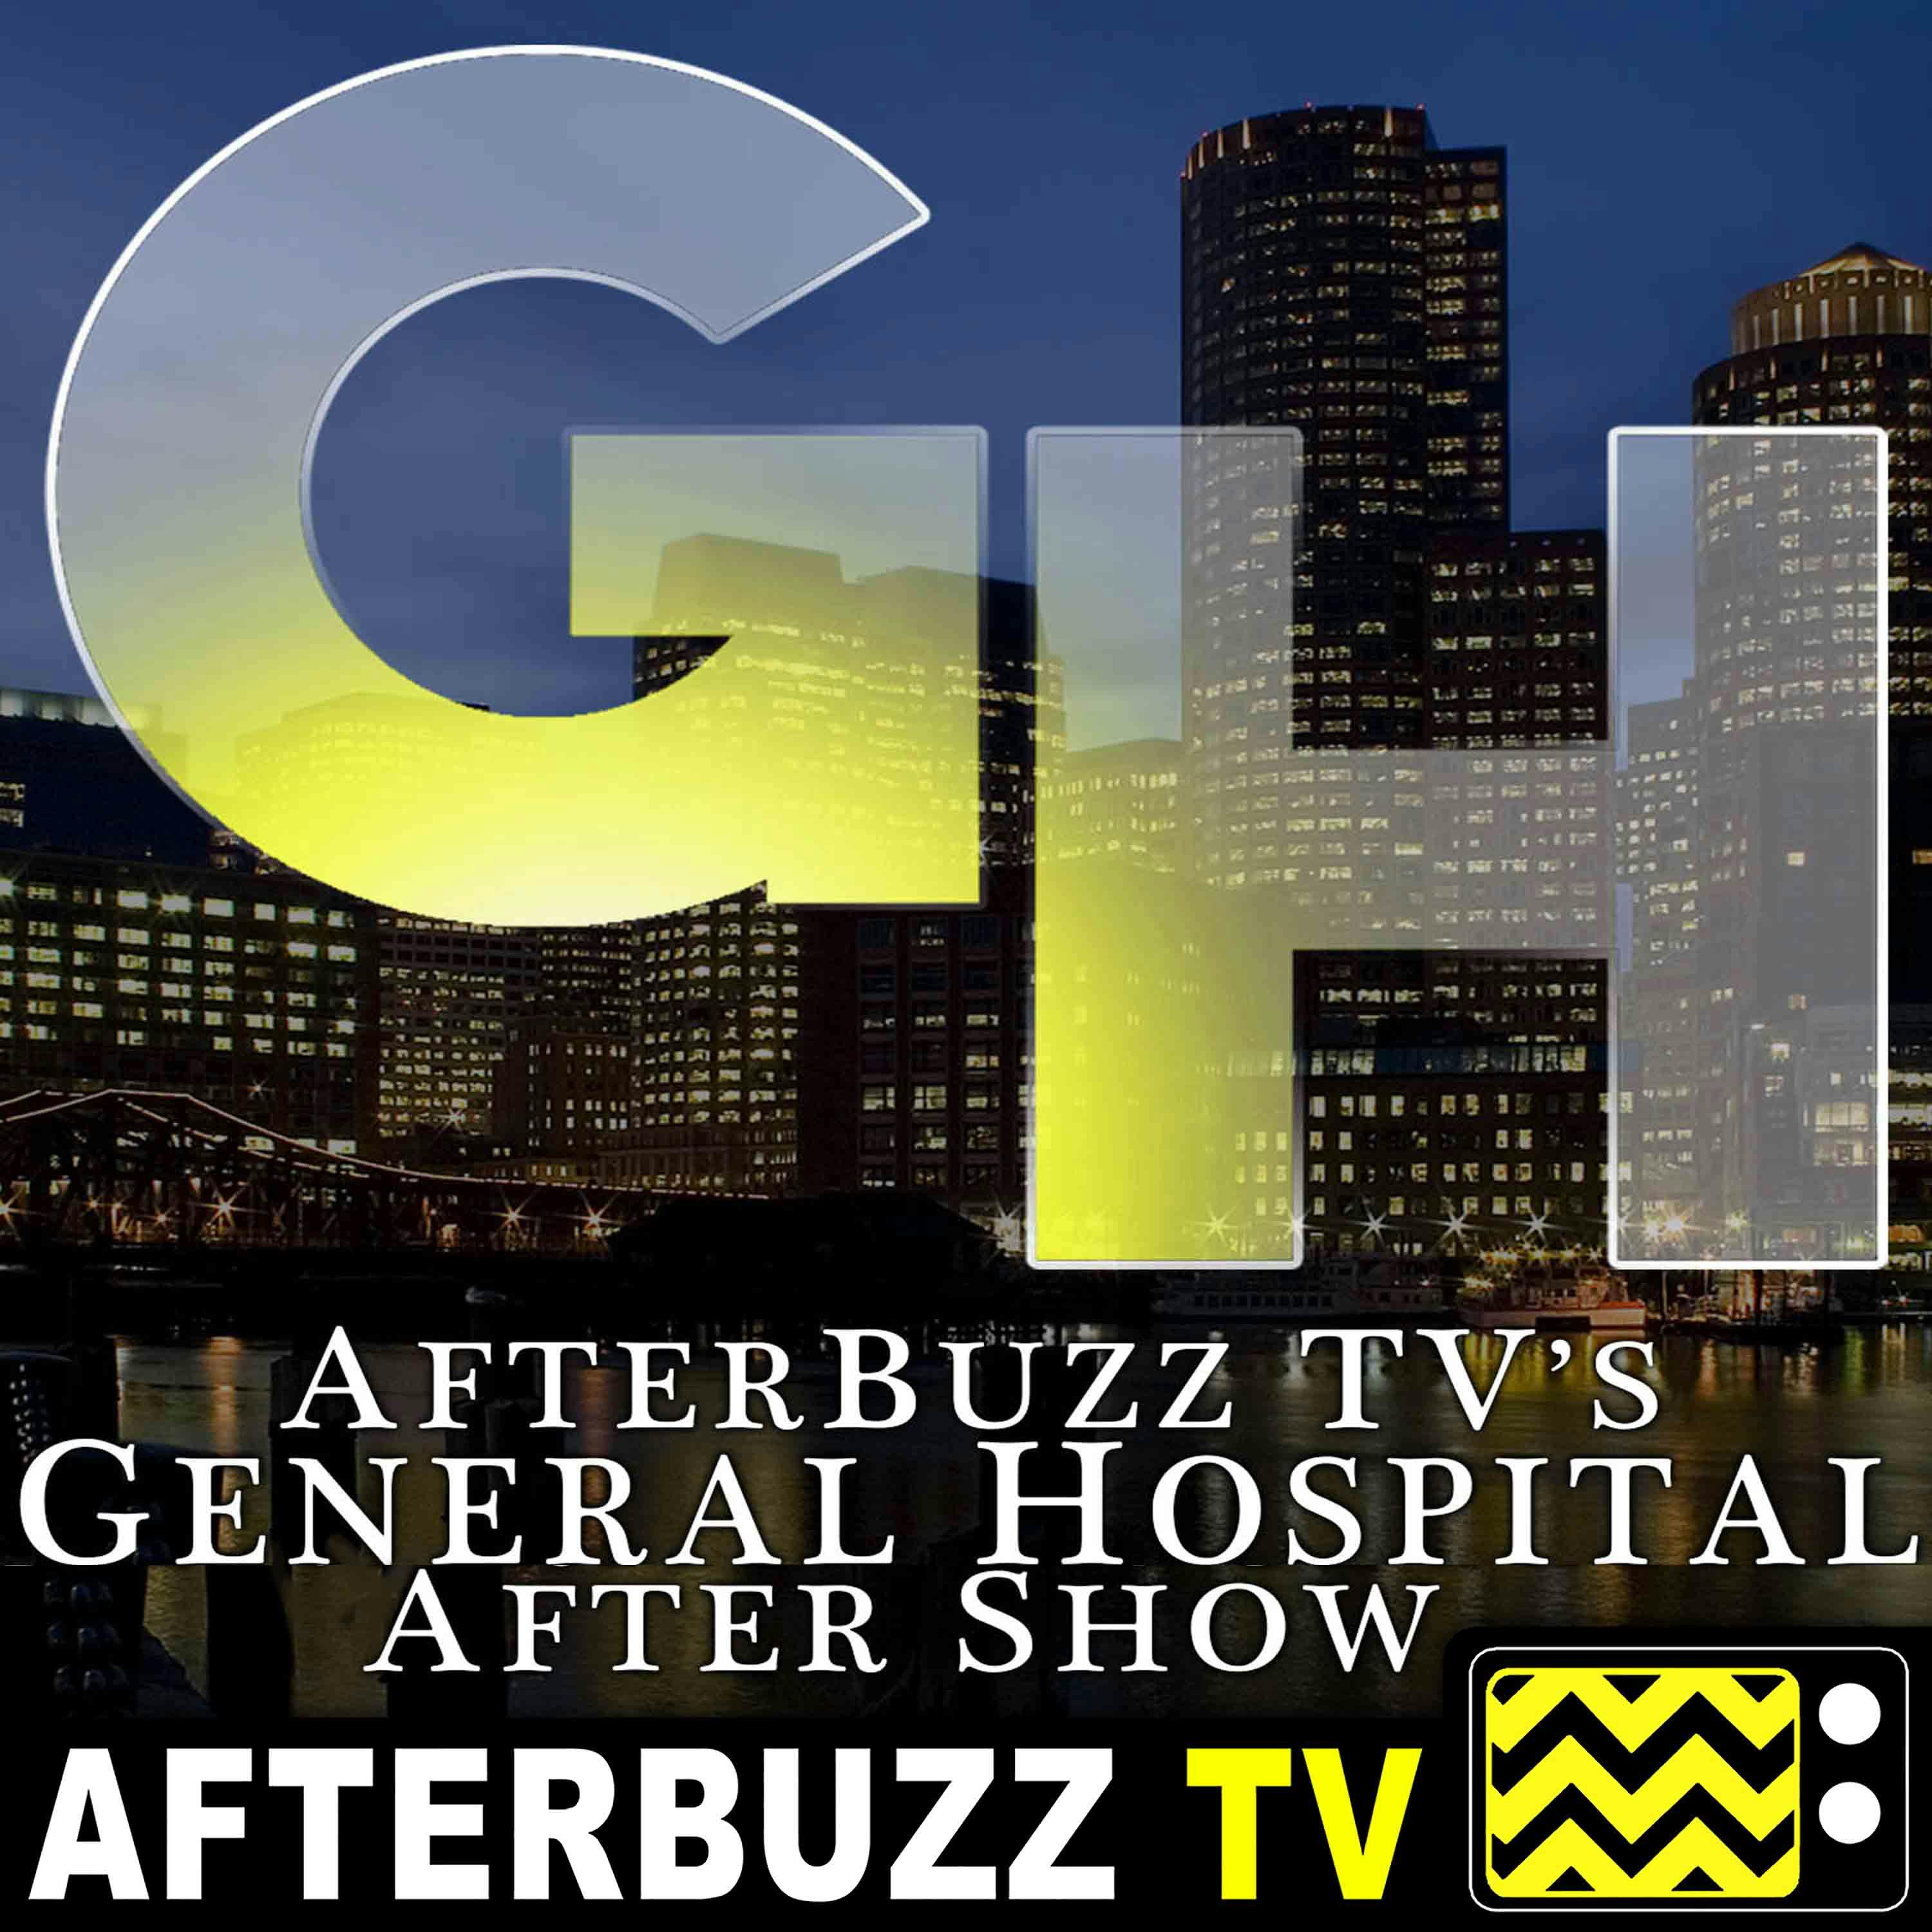 Review Of General Hospital for October 15th - October 19th, 2018